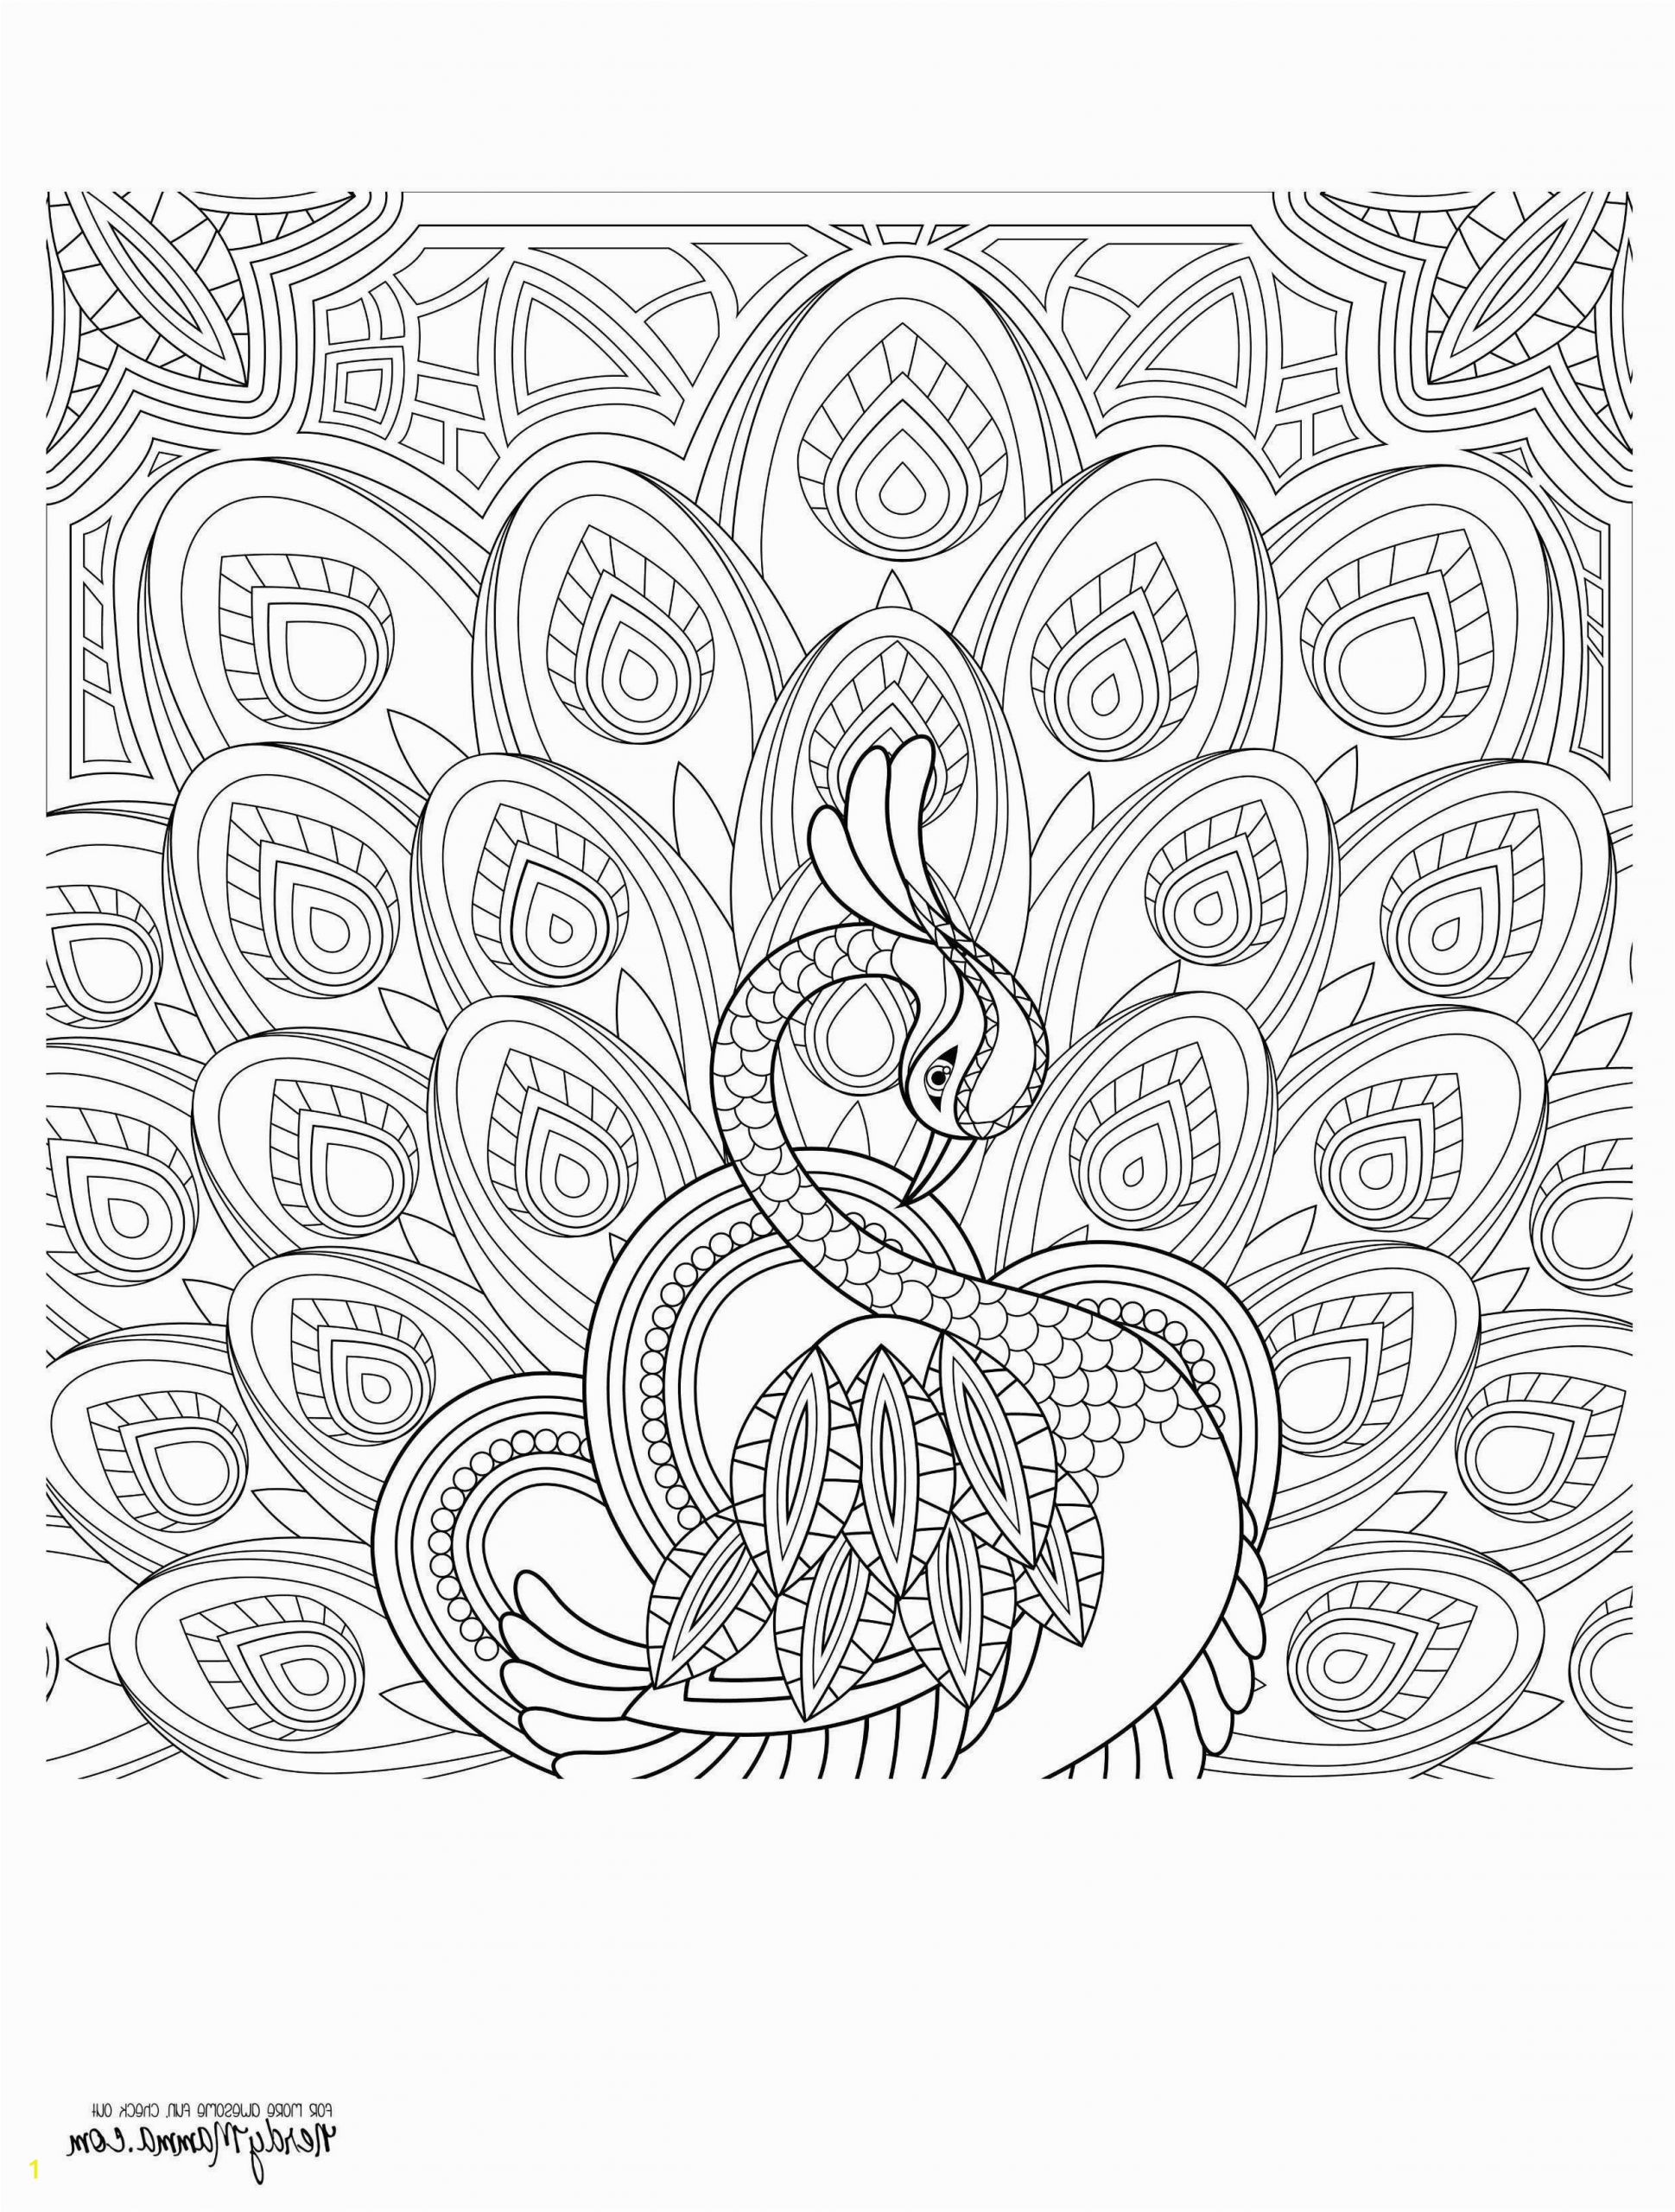 Make My Picture A Coloring Page 20 Beautiful Magical Dawn Coloring Book